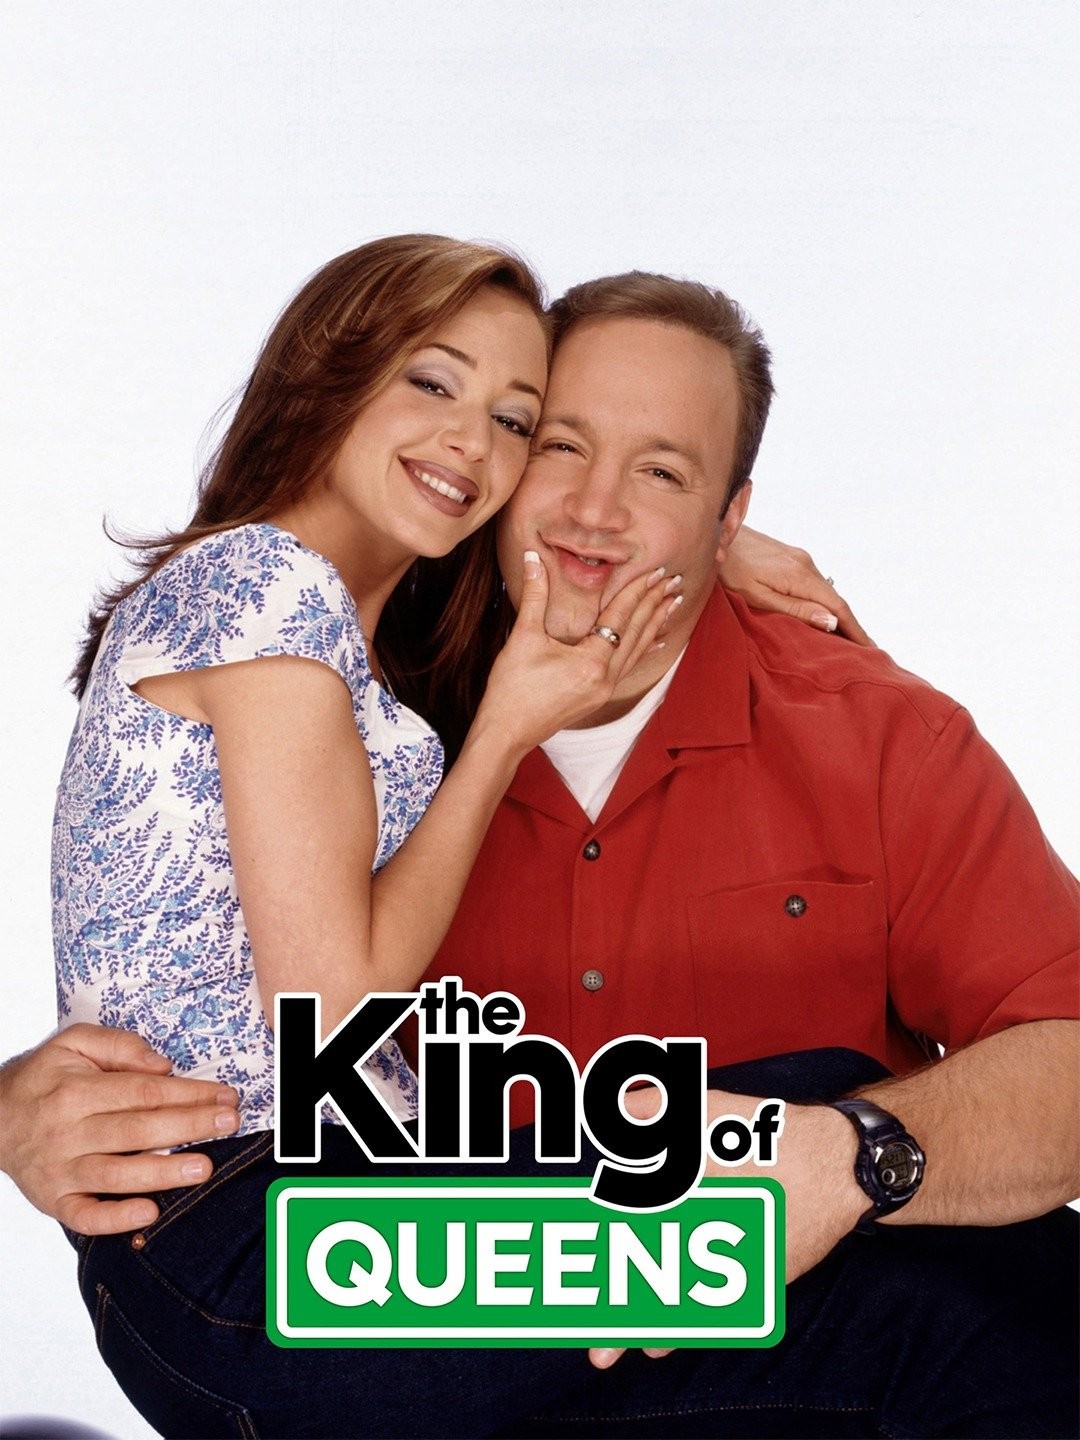 THE KING OF QUEENS